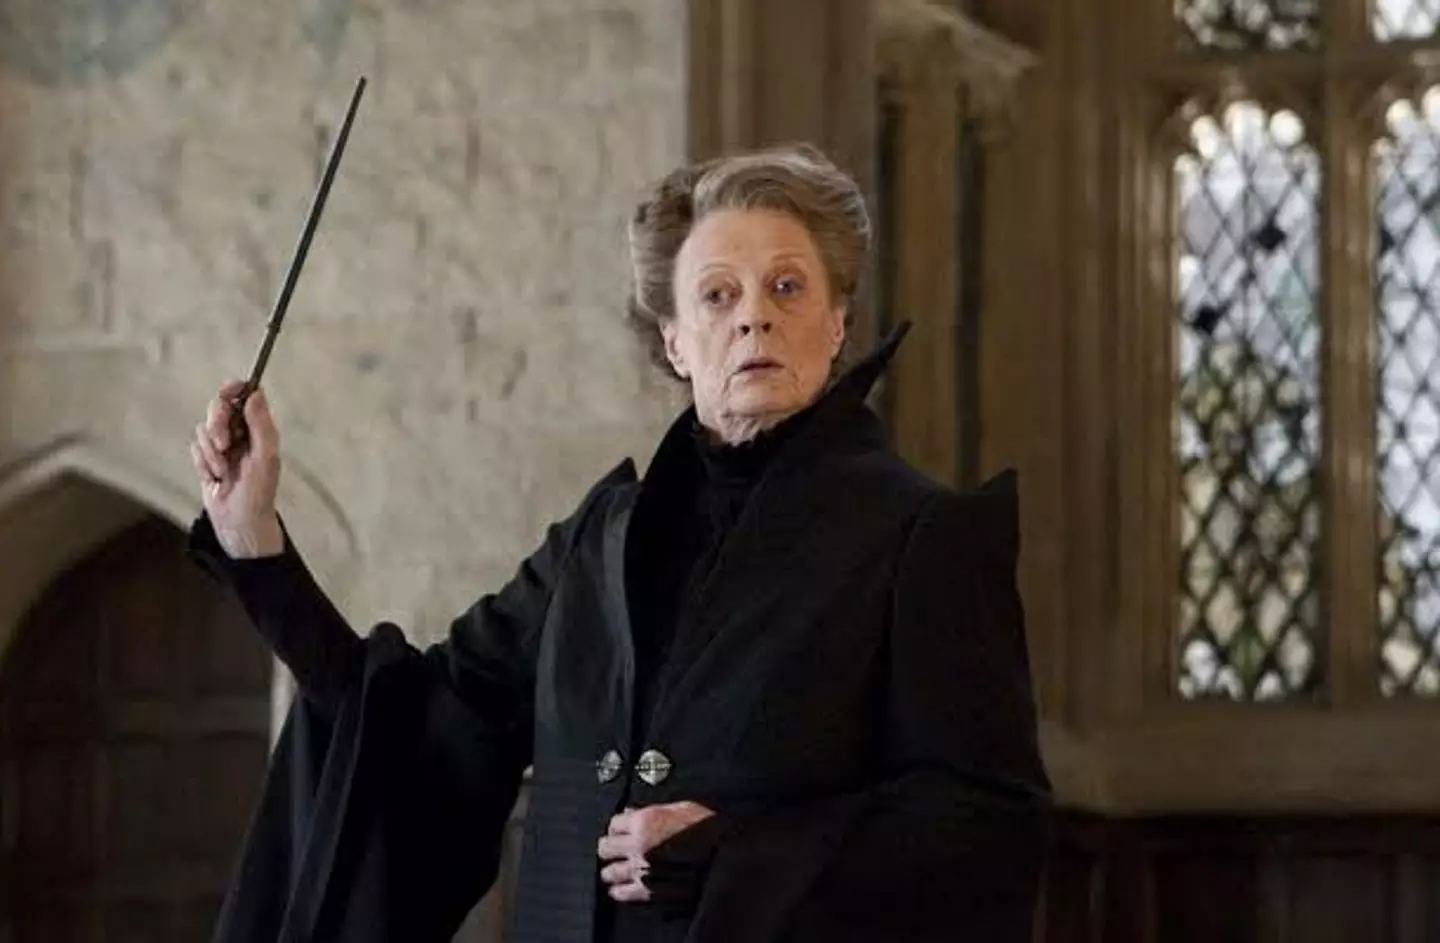 Maggie Smith played Professor Minerva McGonagall in the Harry Potter films.